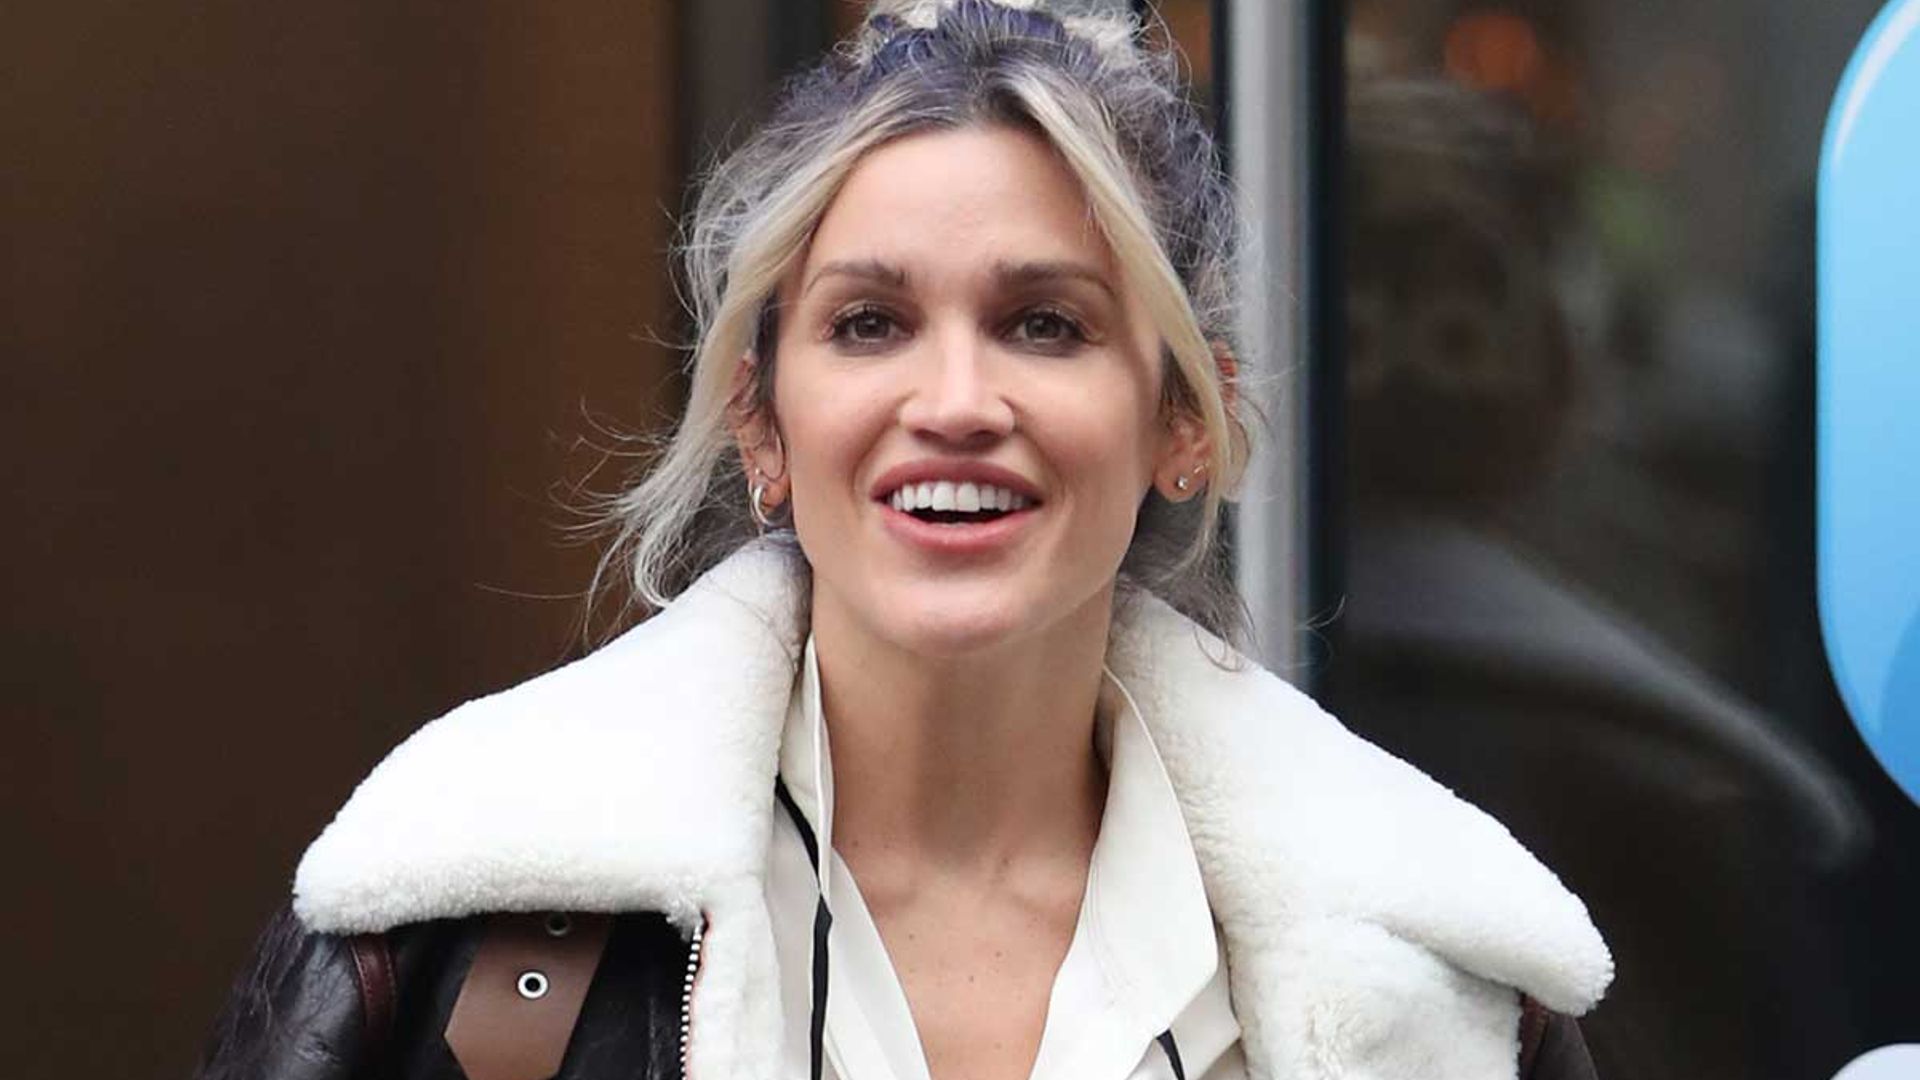 Ashley Roberts shows off her bouncy new hairstyle on Instagram